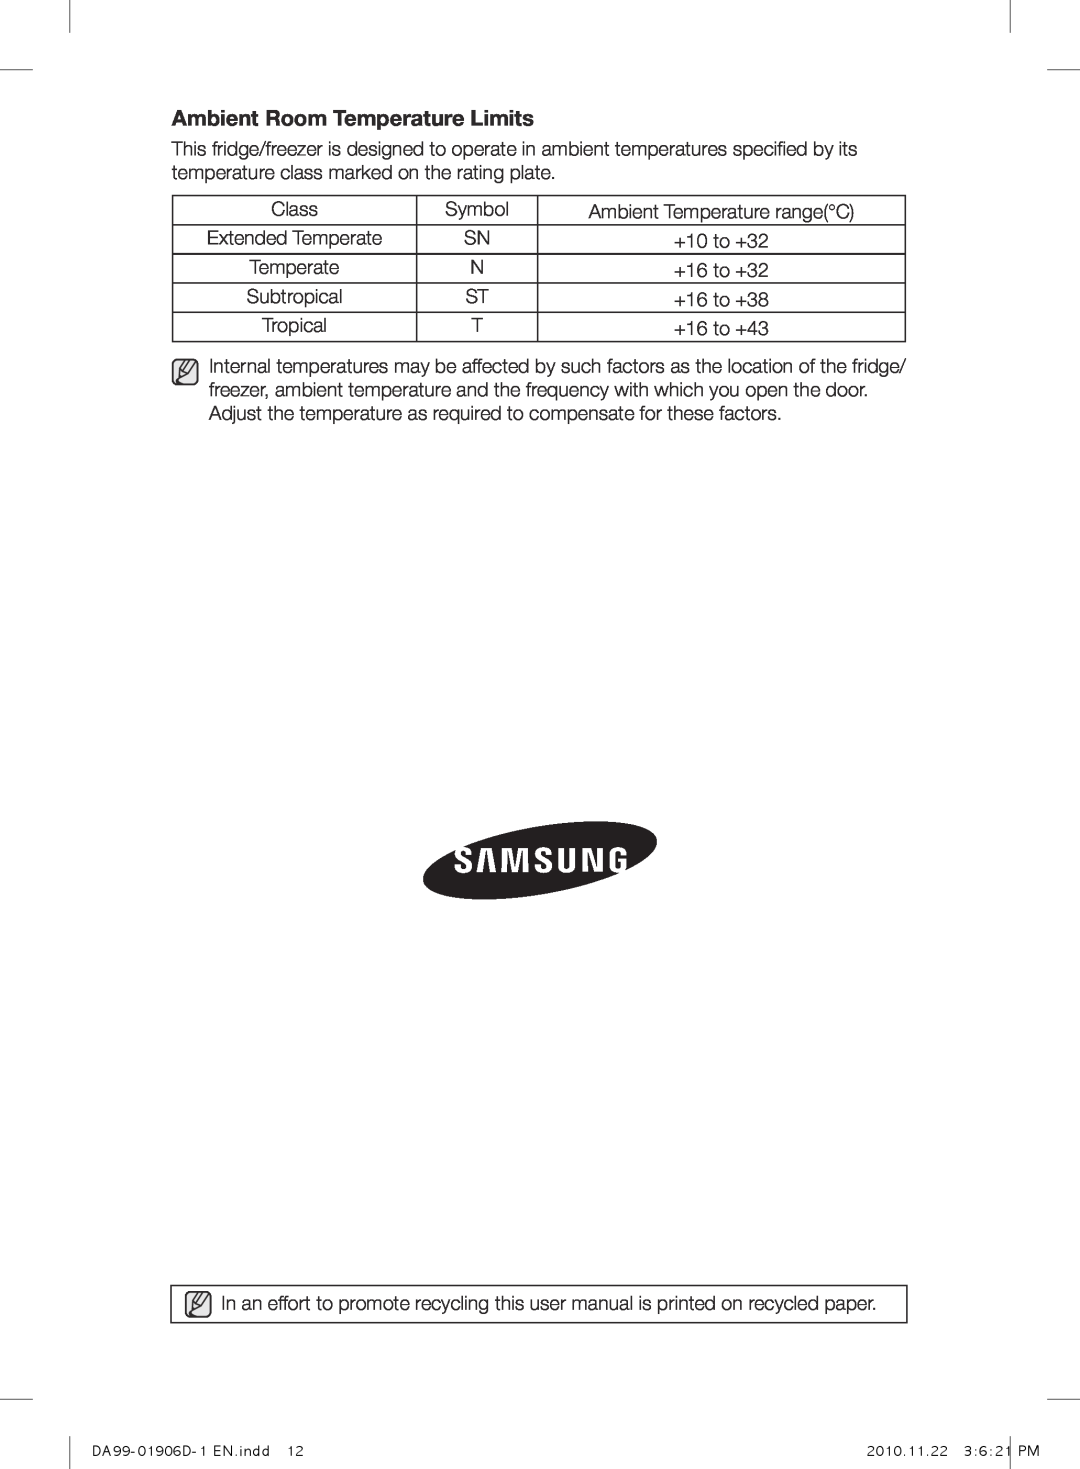 Samsung RT59FBPN1/XMA, RT50FMSW1/XEF, RT59PMSW1/XEF, RT59PBPN1/XEF, RT59NBPN1/XEF manual Ambient Room Temperature Limits 